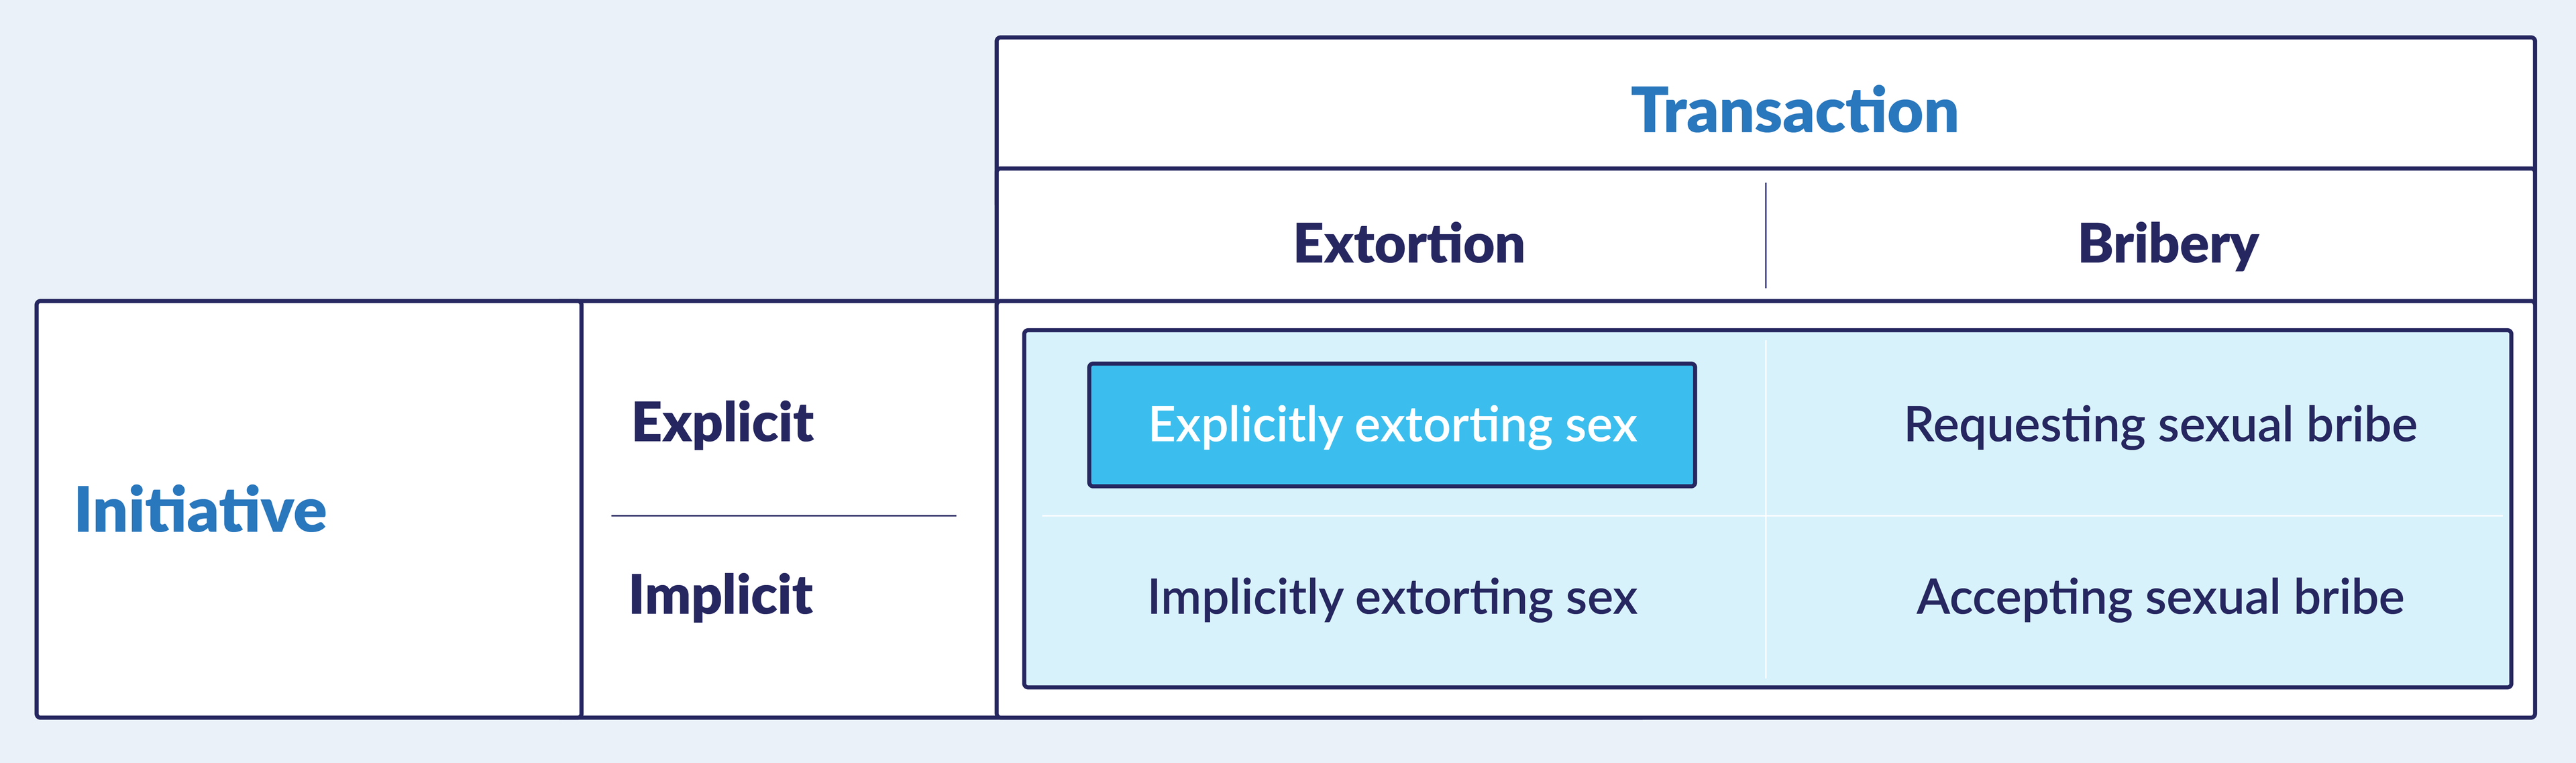 A short showing two rows and two columns. The two ‘transaction’ columns are split into ‘extortion’ and ‘bribery’; the two ‘initiative’ rows are split into ’explicit’ and ‘implicit’.  The value of explicit and extortion is ‘explicitly extorting sex’. The value of explicit and bribery is ‘requesting sexual bribe’. The value of implicit and extortion is ‘implicitly extorting sex’. The value of implicit and bribery is ‘accepting sexual bribe’.